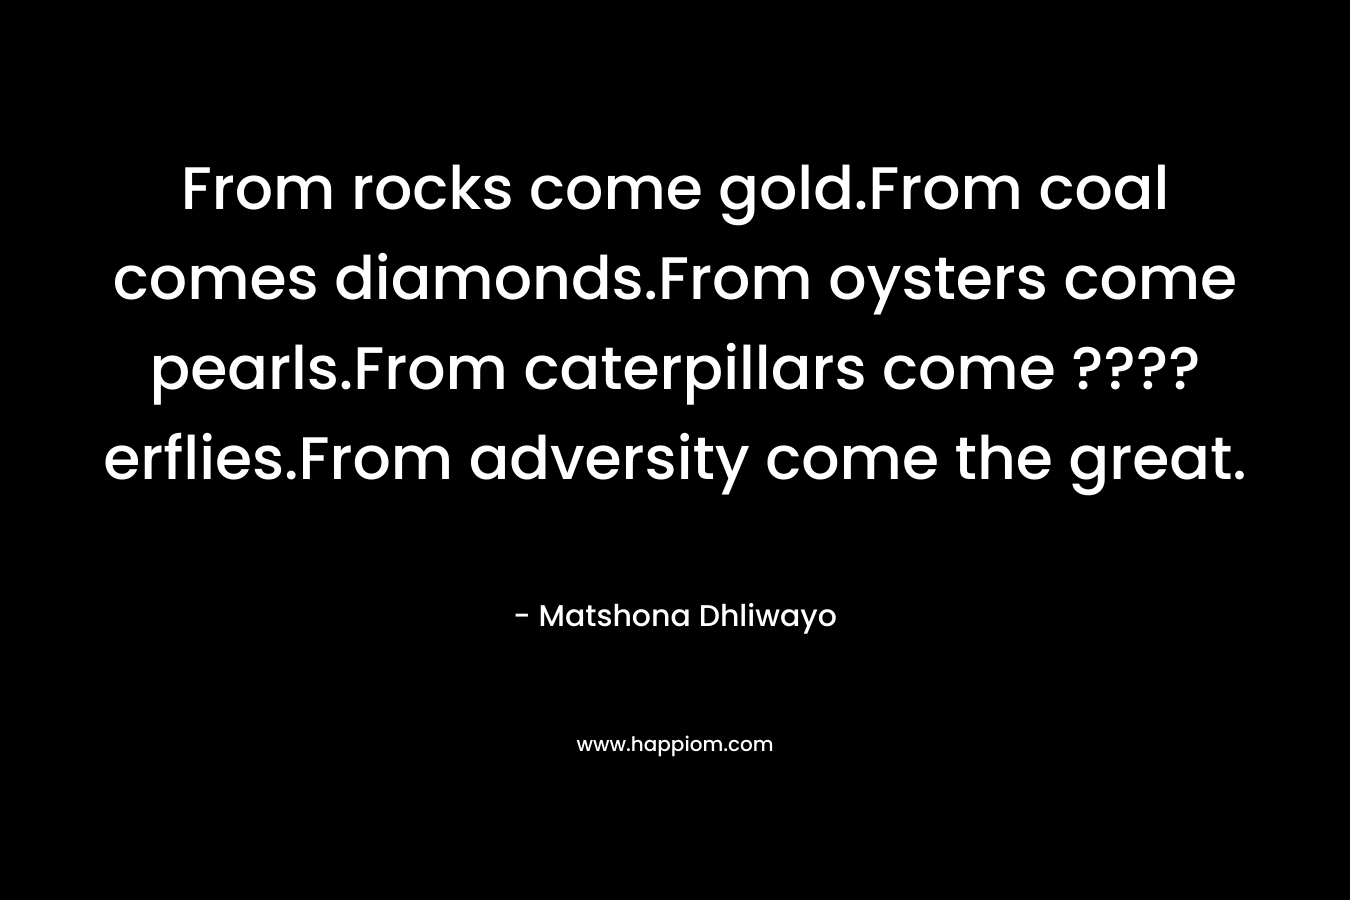 From rocks come gold.From coal comes diamonds.From oysters come pearls.From caterpillars come ????erflies.From adversity come the great. – Matshona Dhliwayo